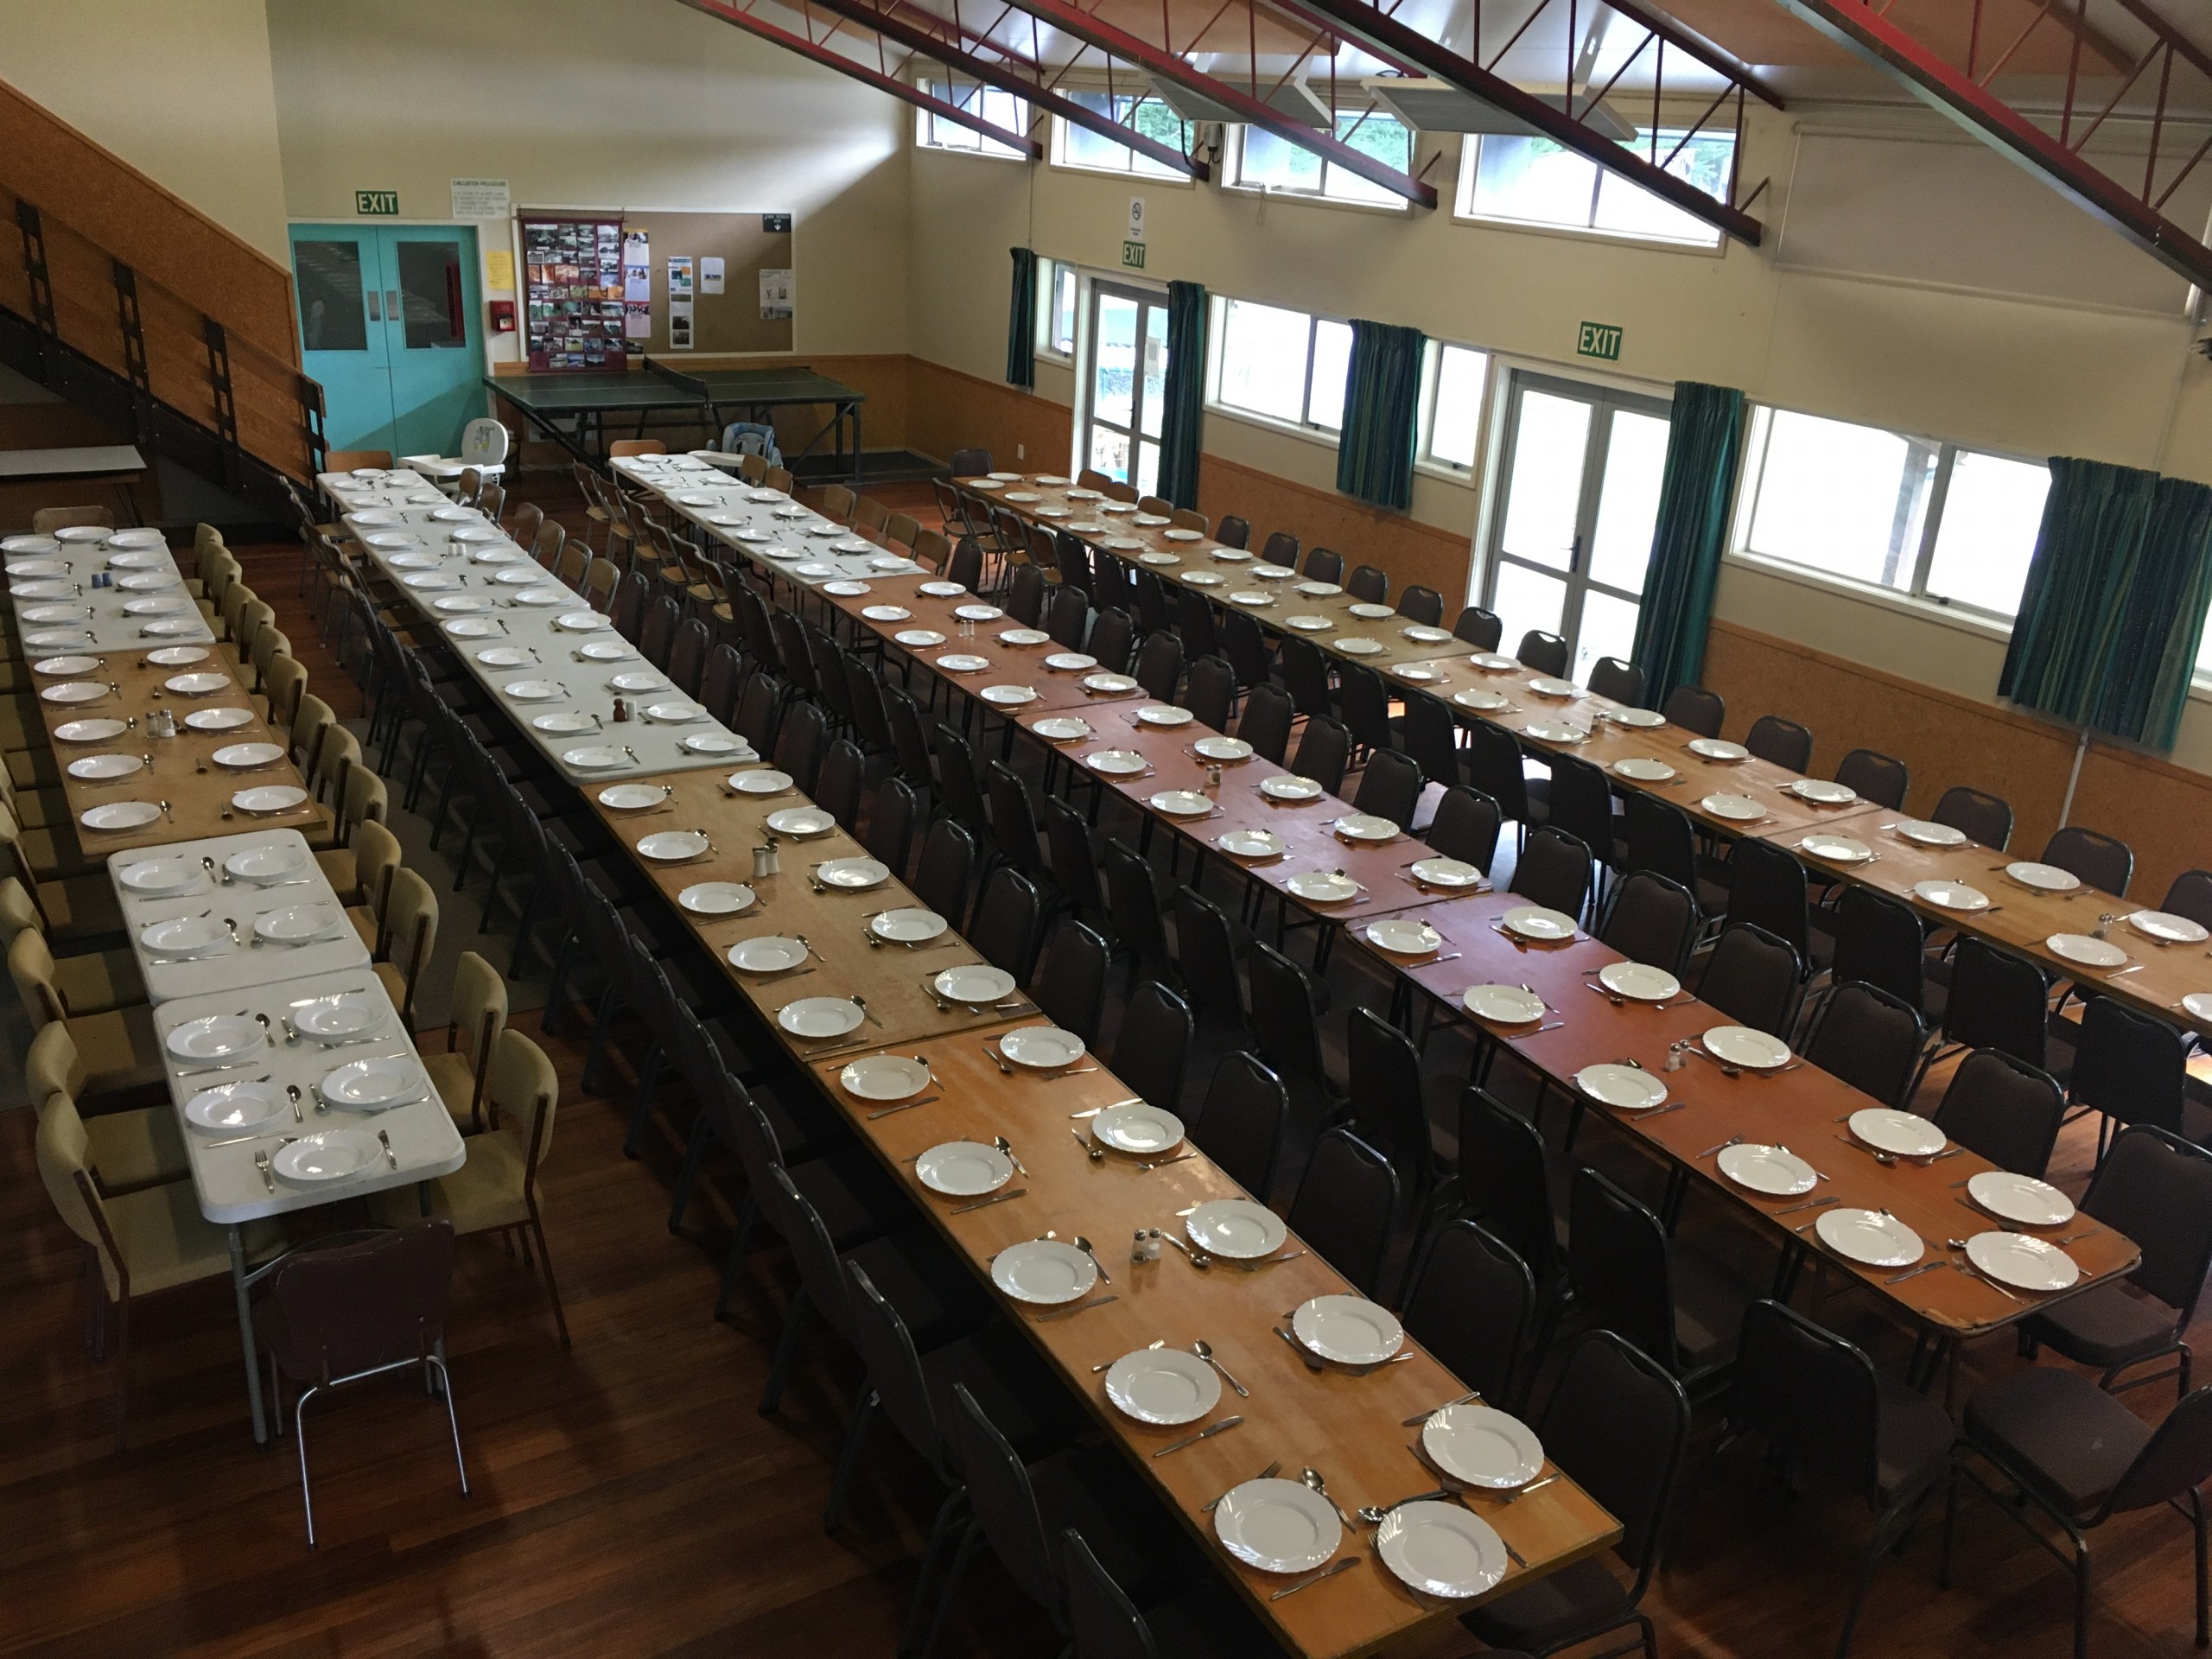 Hall set up for 164 eating